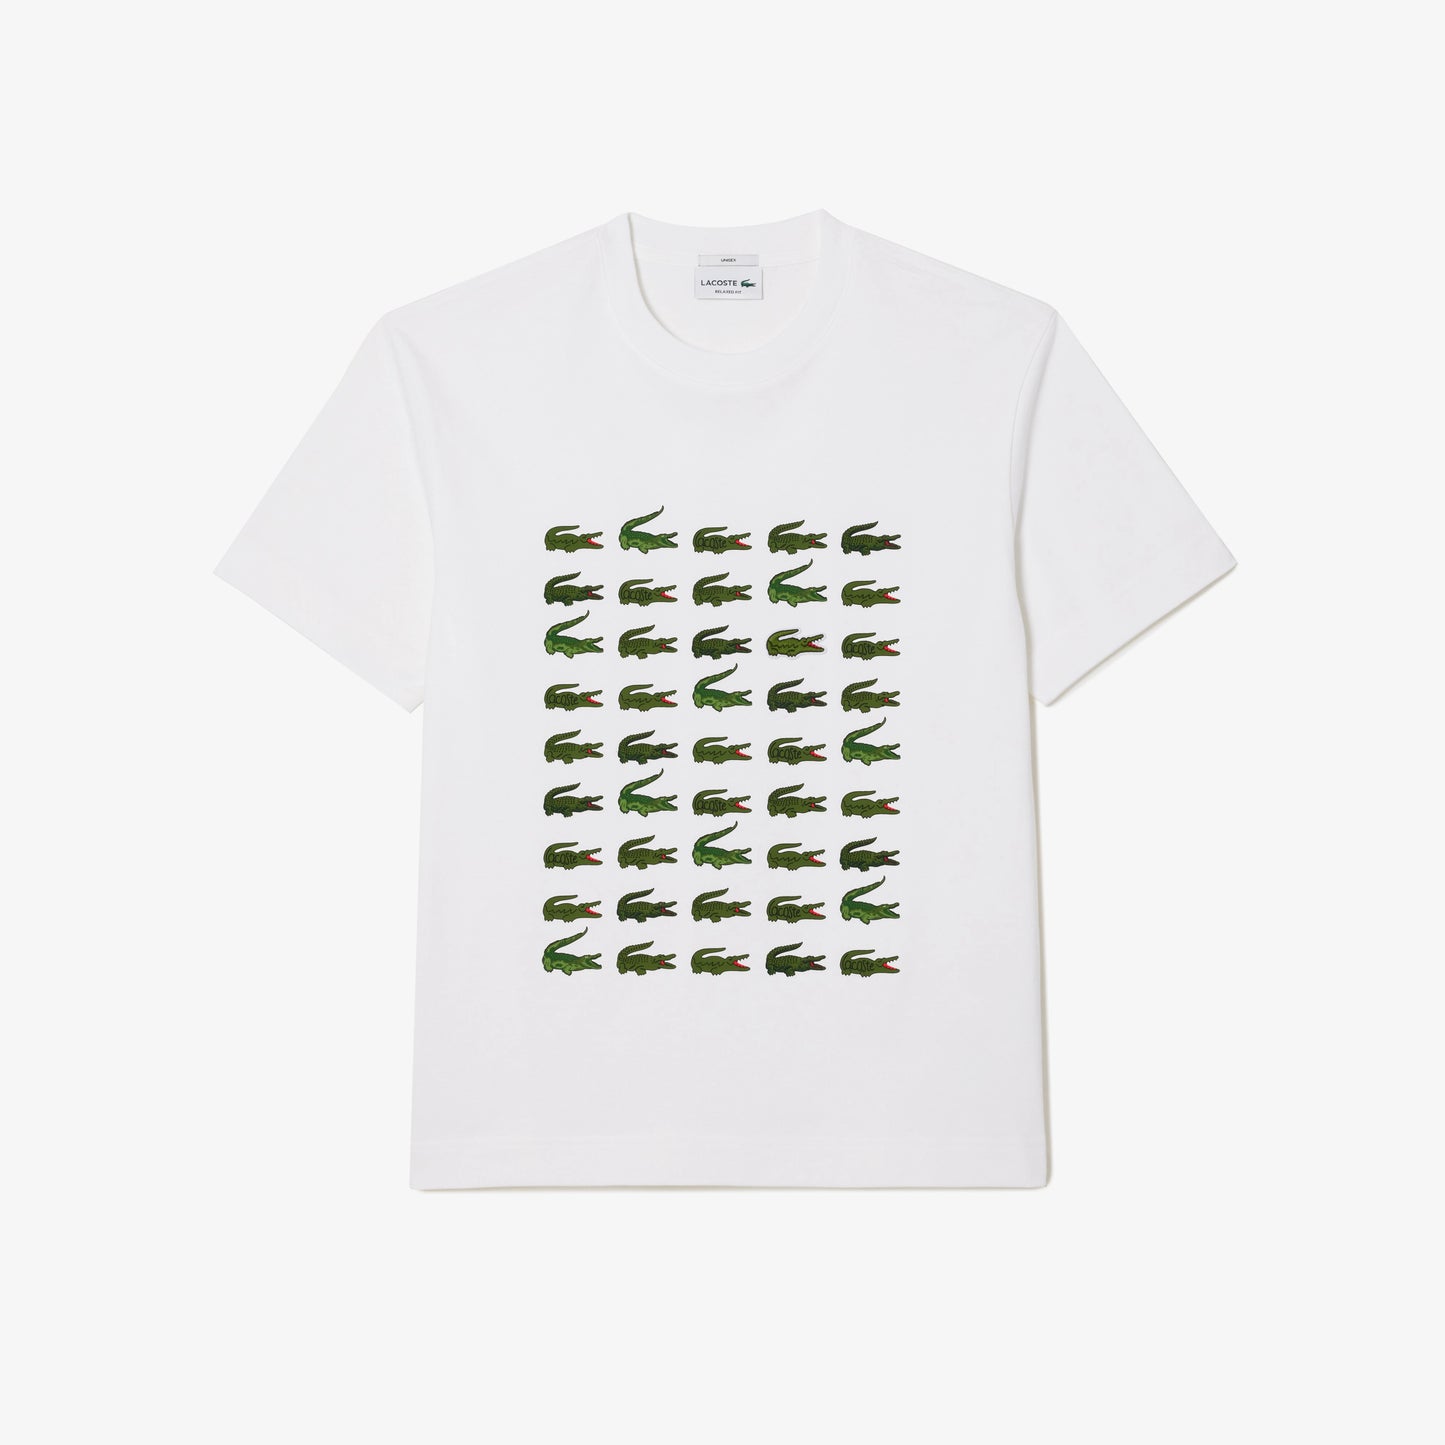 UNISEX RELAXED FIT ICONIC PRINT T-SHIRT Unisex - White - Lacoste - T-Shirts $41.99